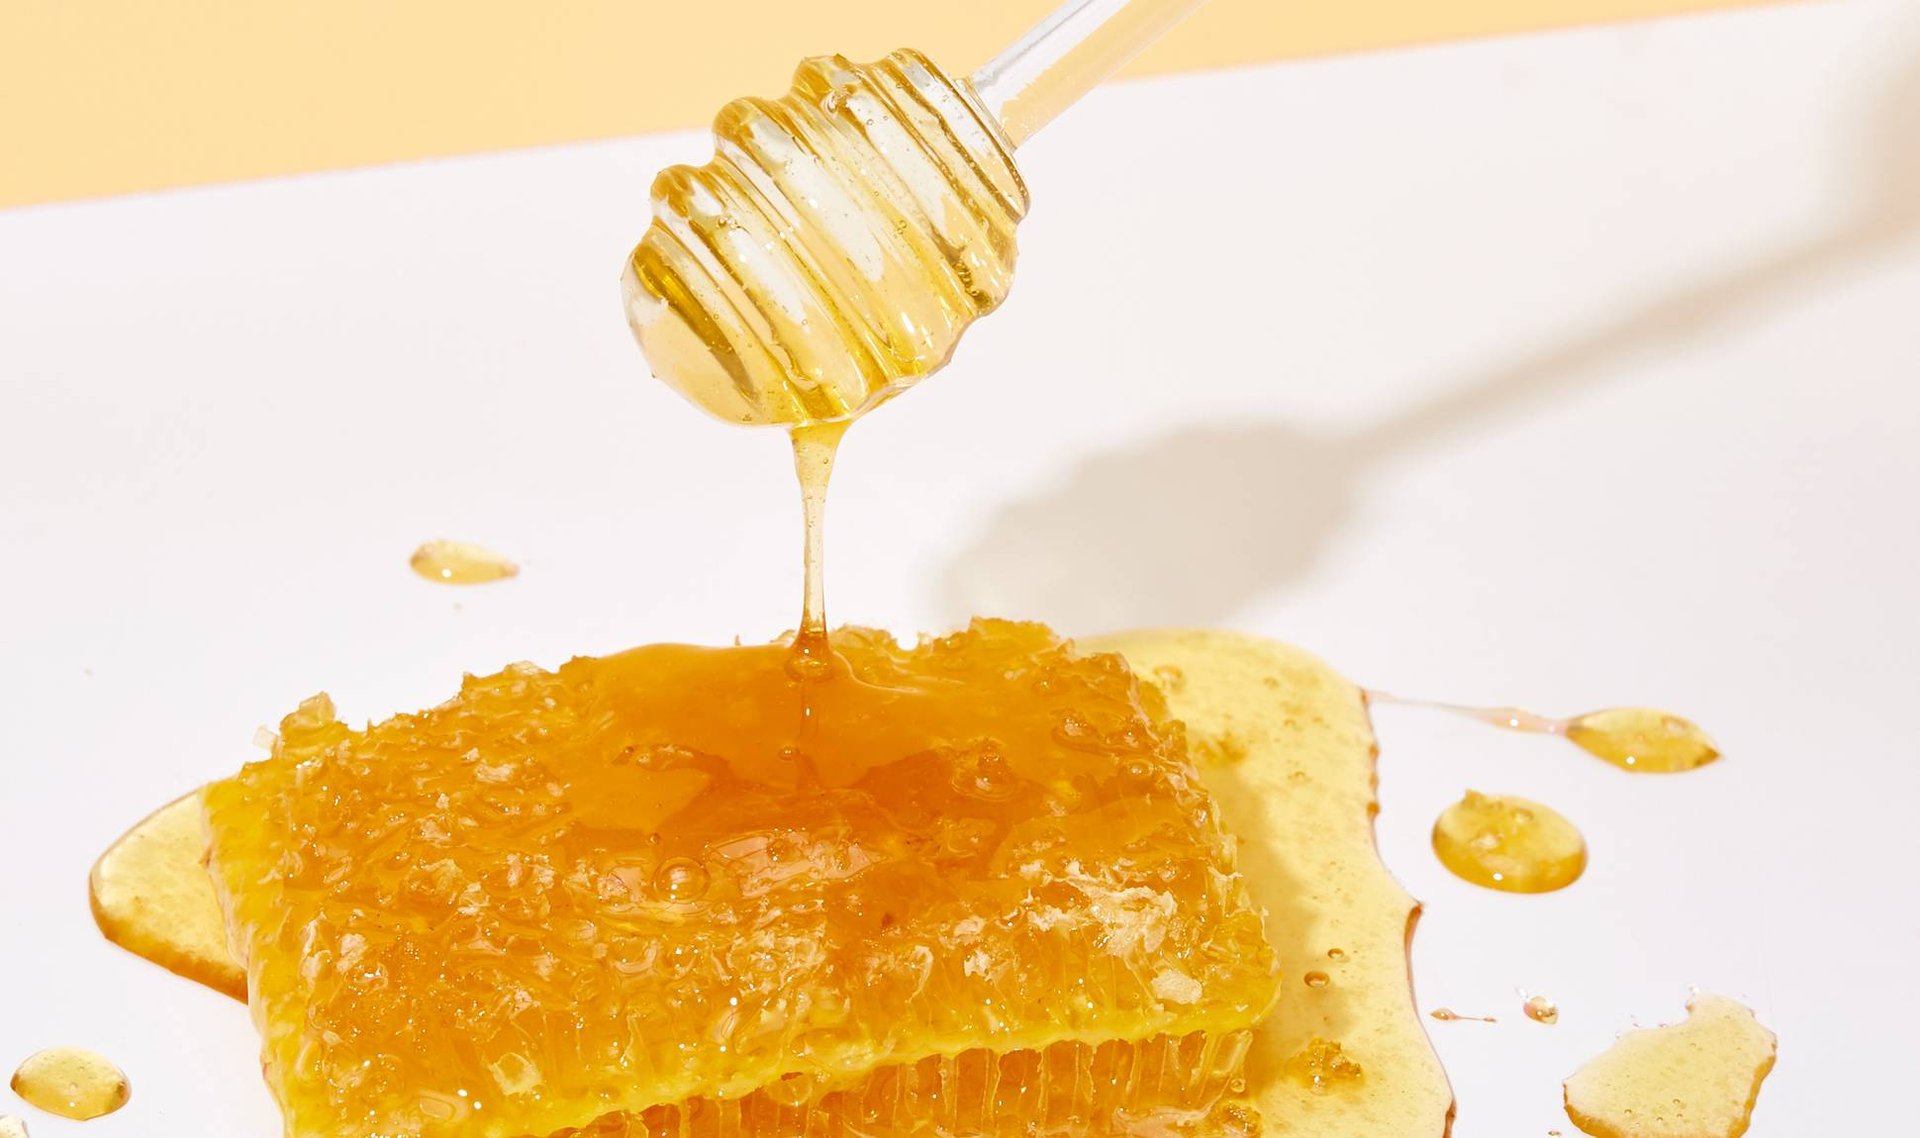 This Little Known Skin-Care Ingredient Is a Gift From Bees